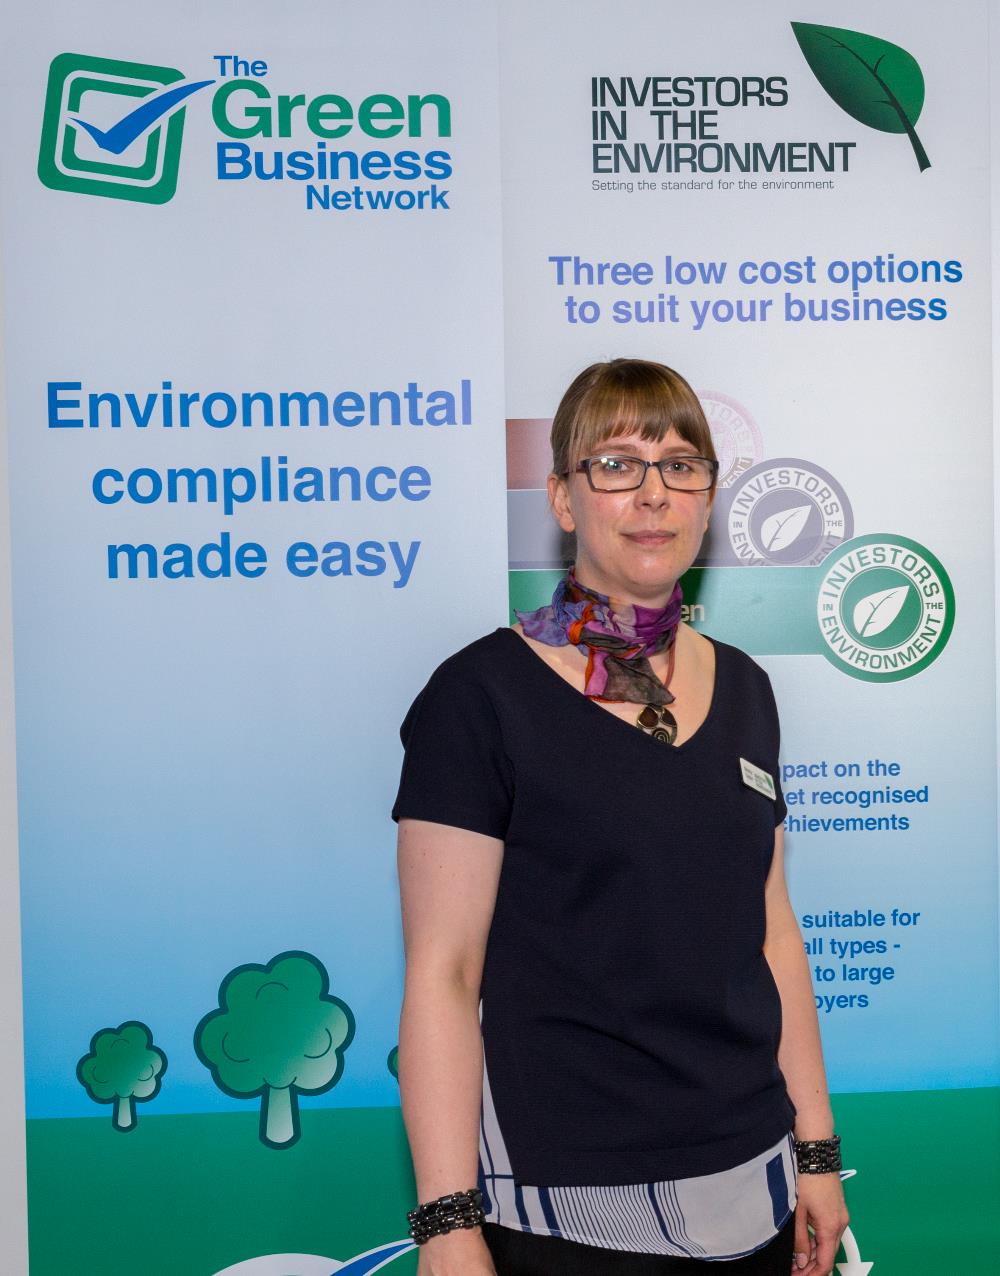 Becky Taylor from Investors in the Environment